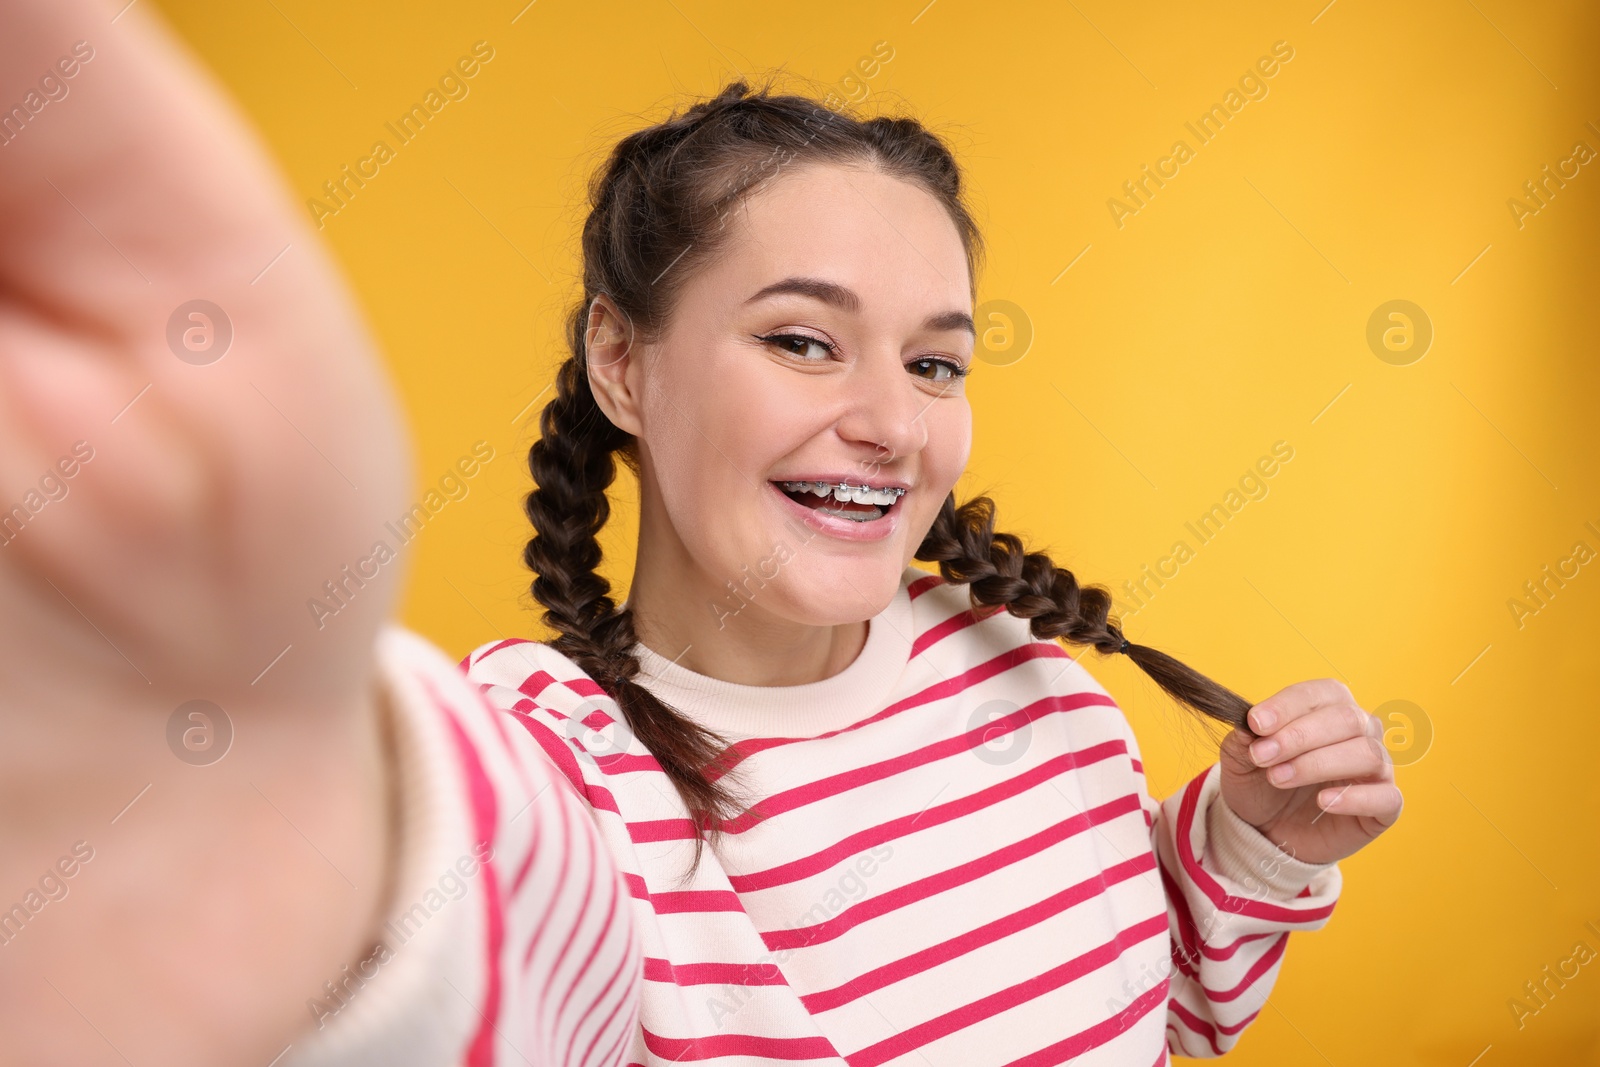 Photo of Smiling woman with braces taking selfie on orange background